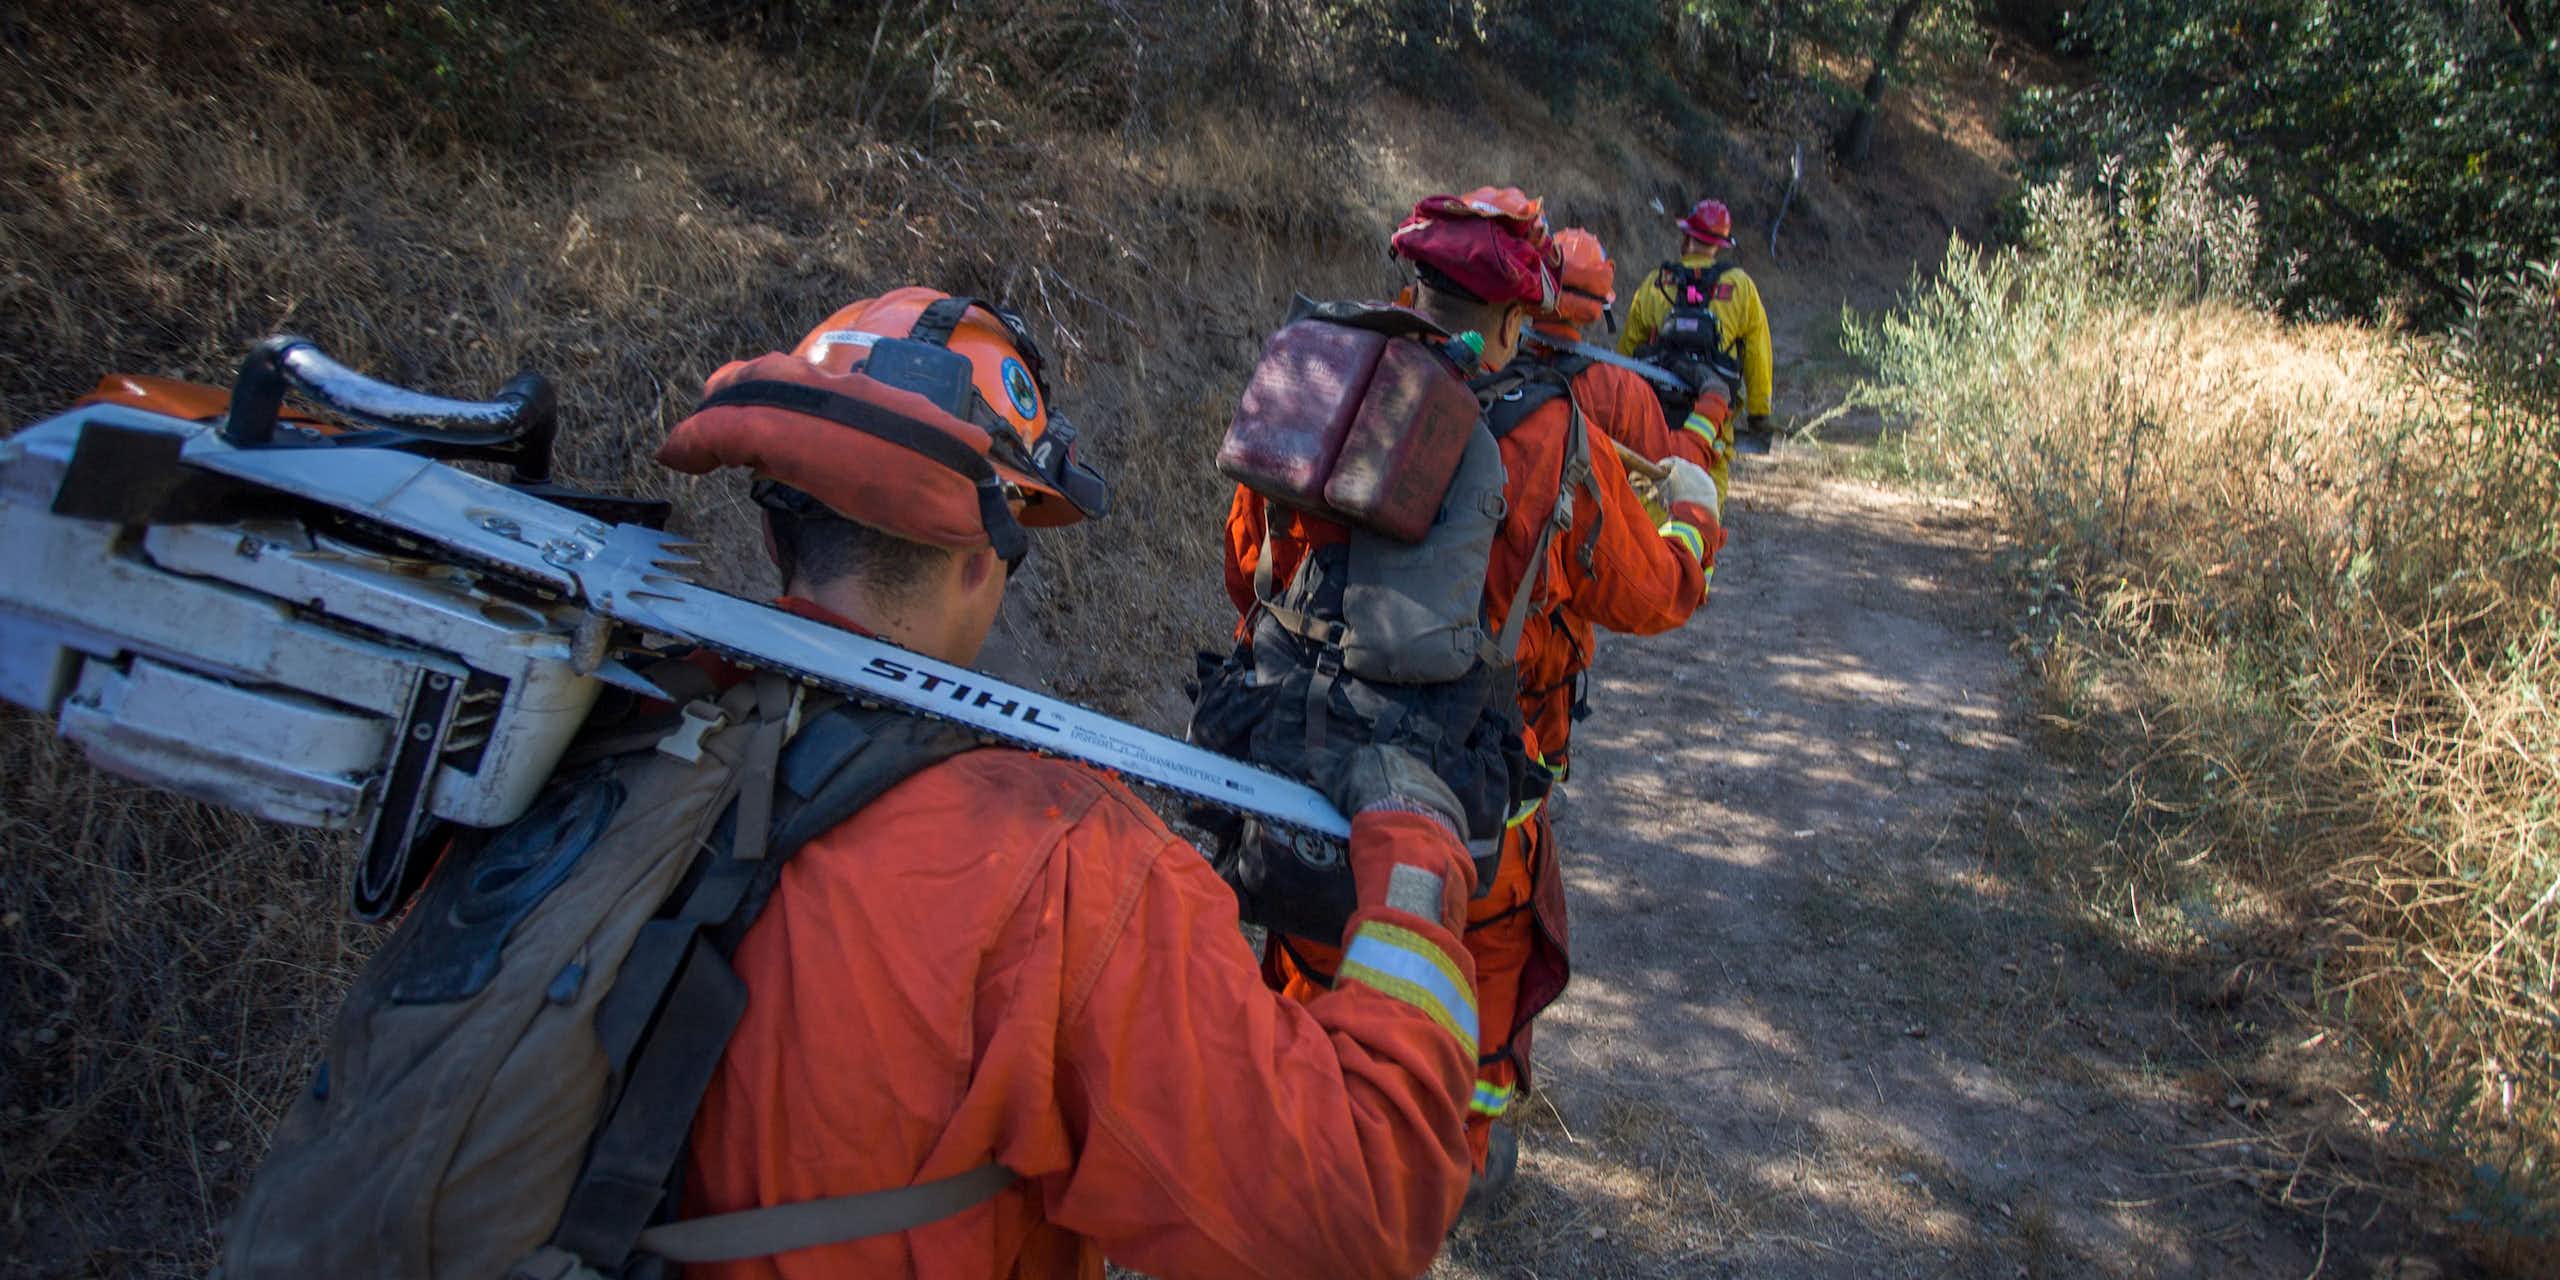 Inmate firefighters in orange and carrying equipment for fighting fires follow a crew chief along a path.